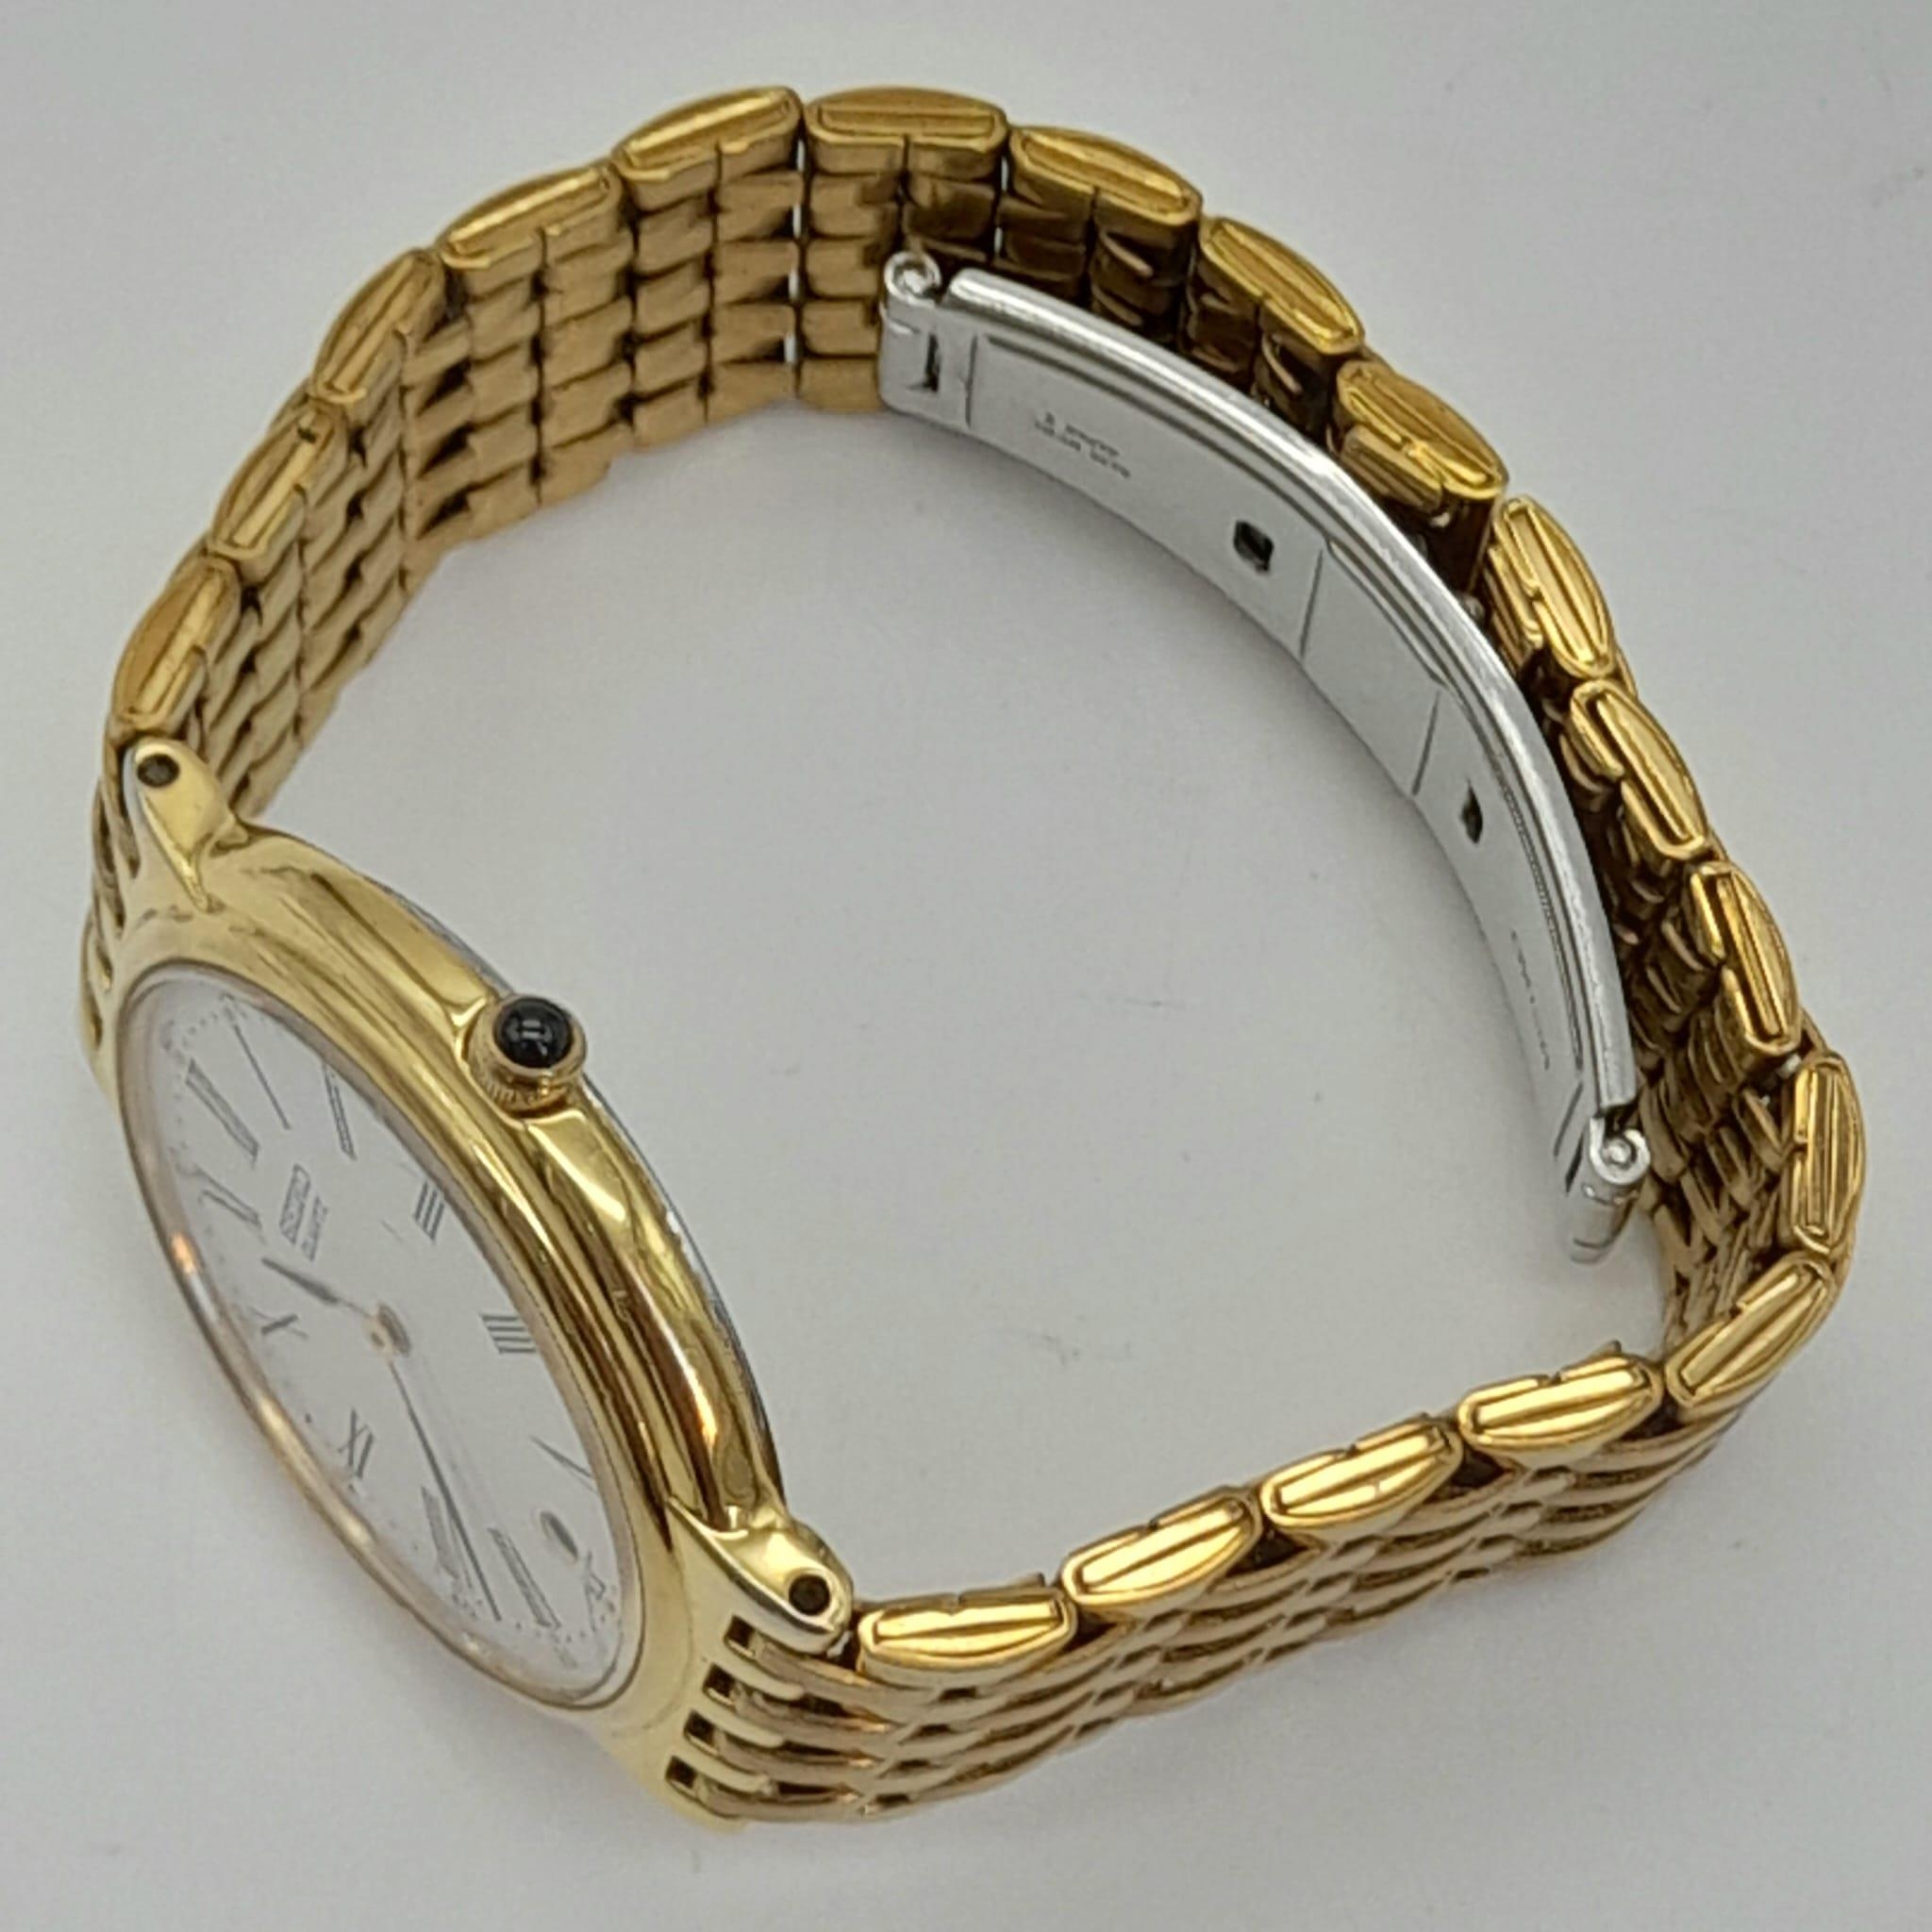 A Gilded Seiko Quartz Ladies Watch. Case -34mm. White dial with date window. In good condition and - Image 3 of 5